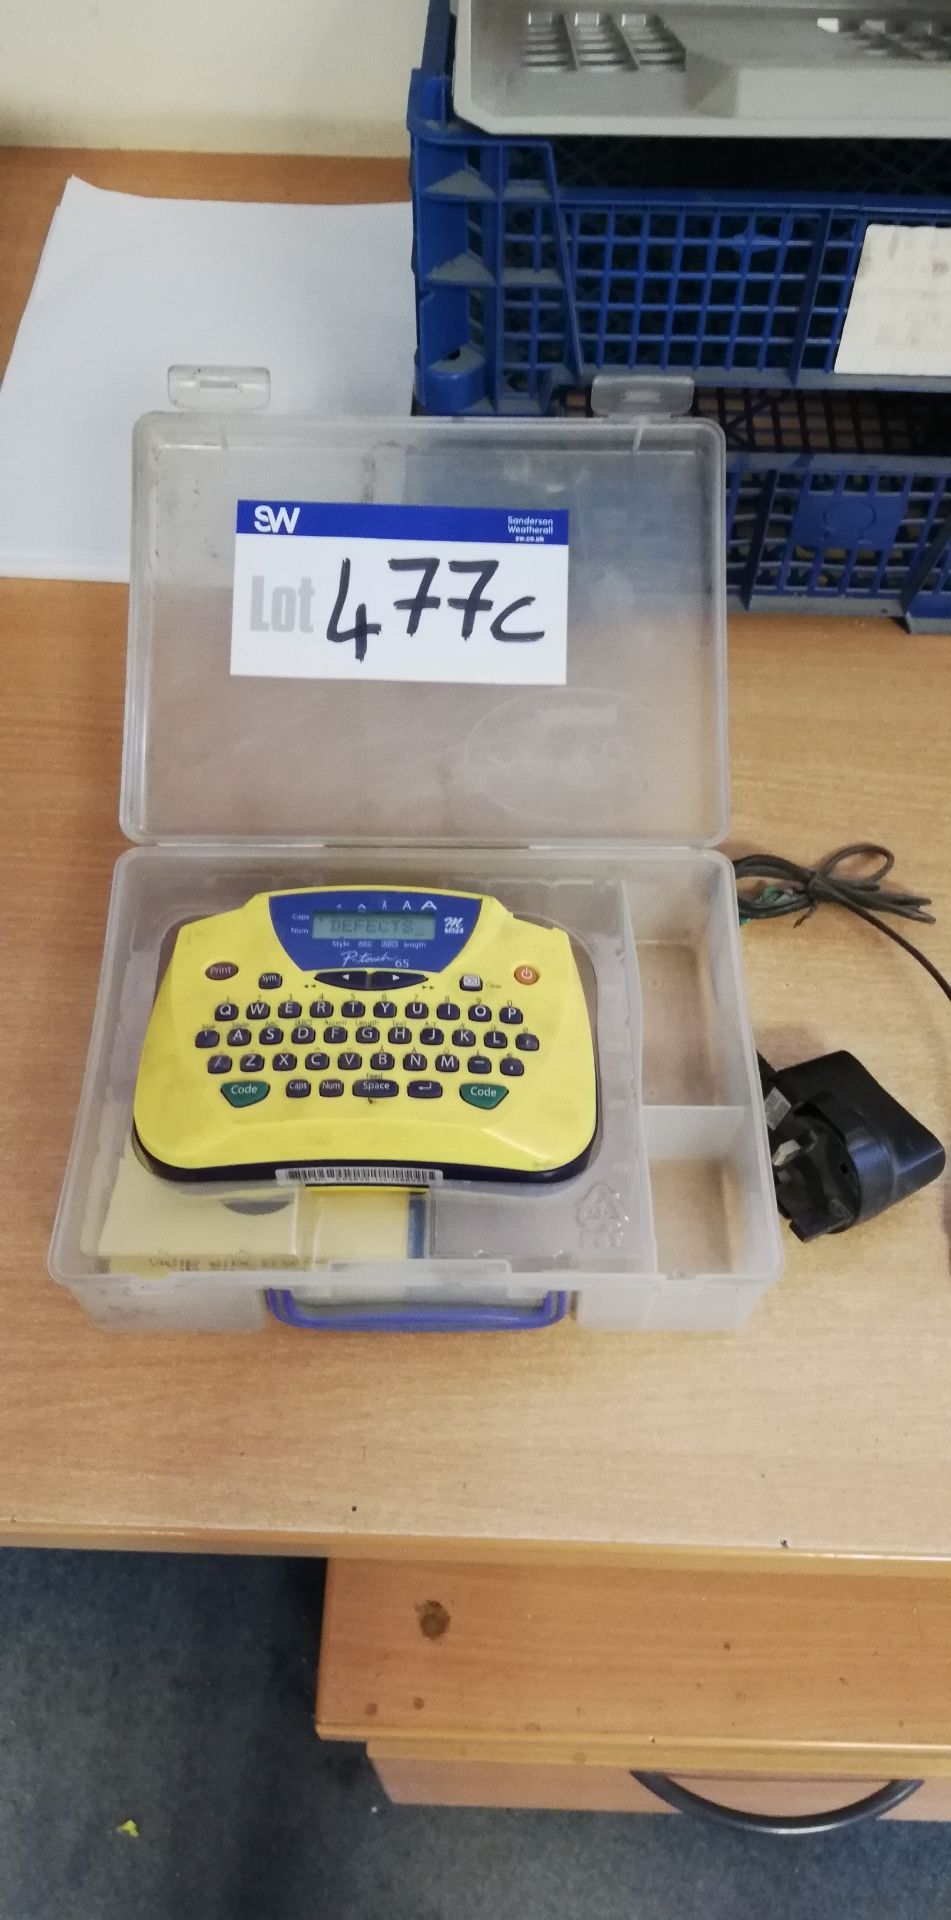 Brother PTouch65 Label Printer, serial no. Es2838-H2J566225 (lot located at Bedfords Limited (In